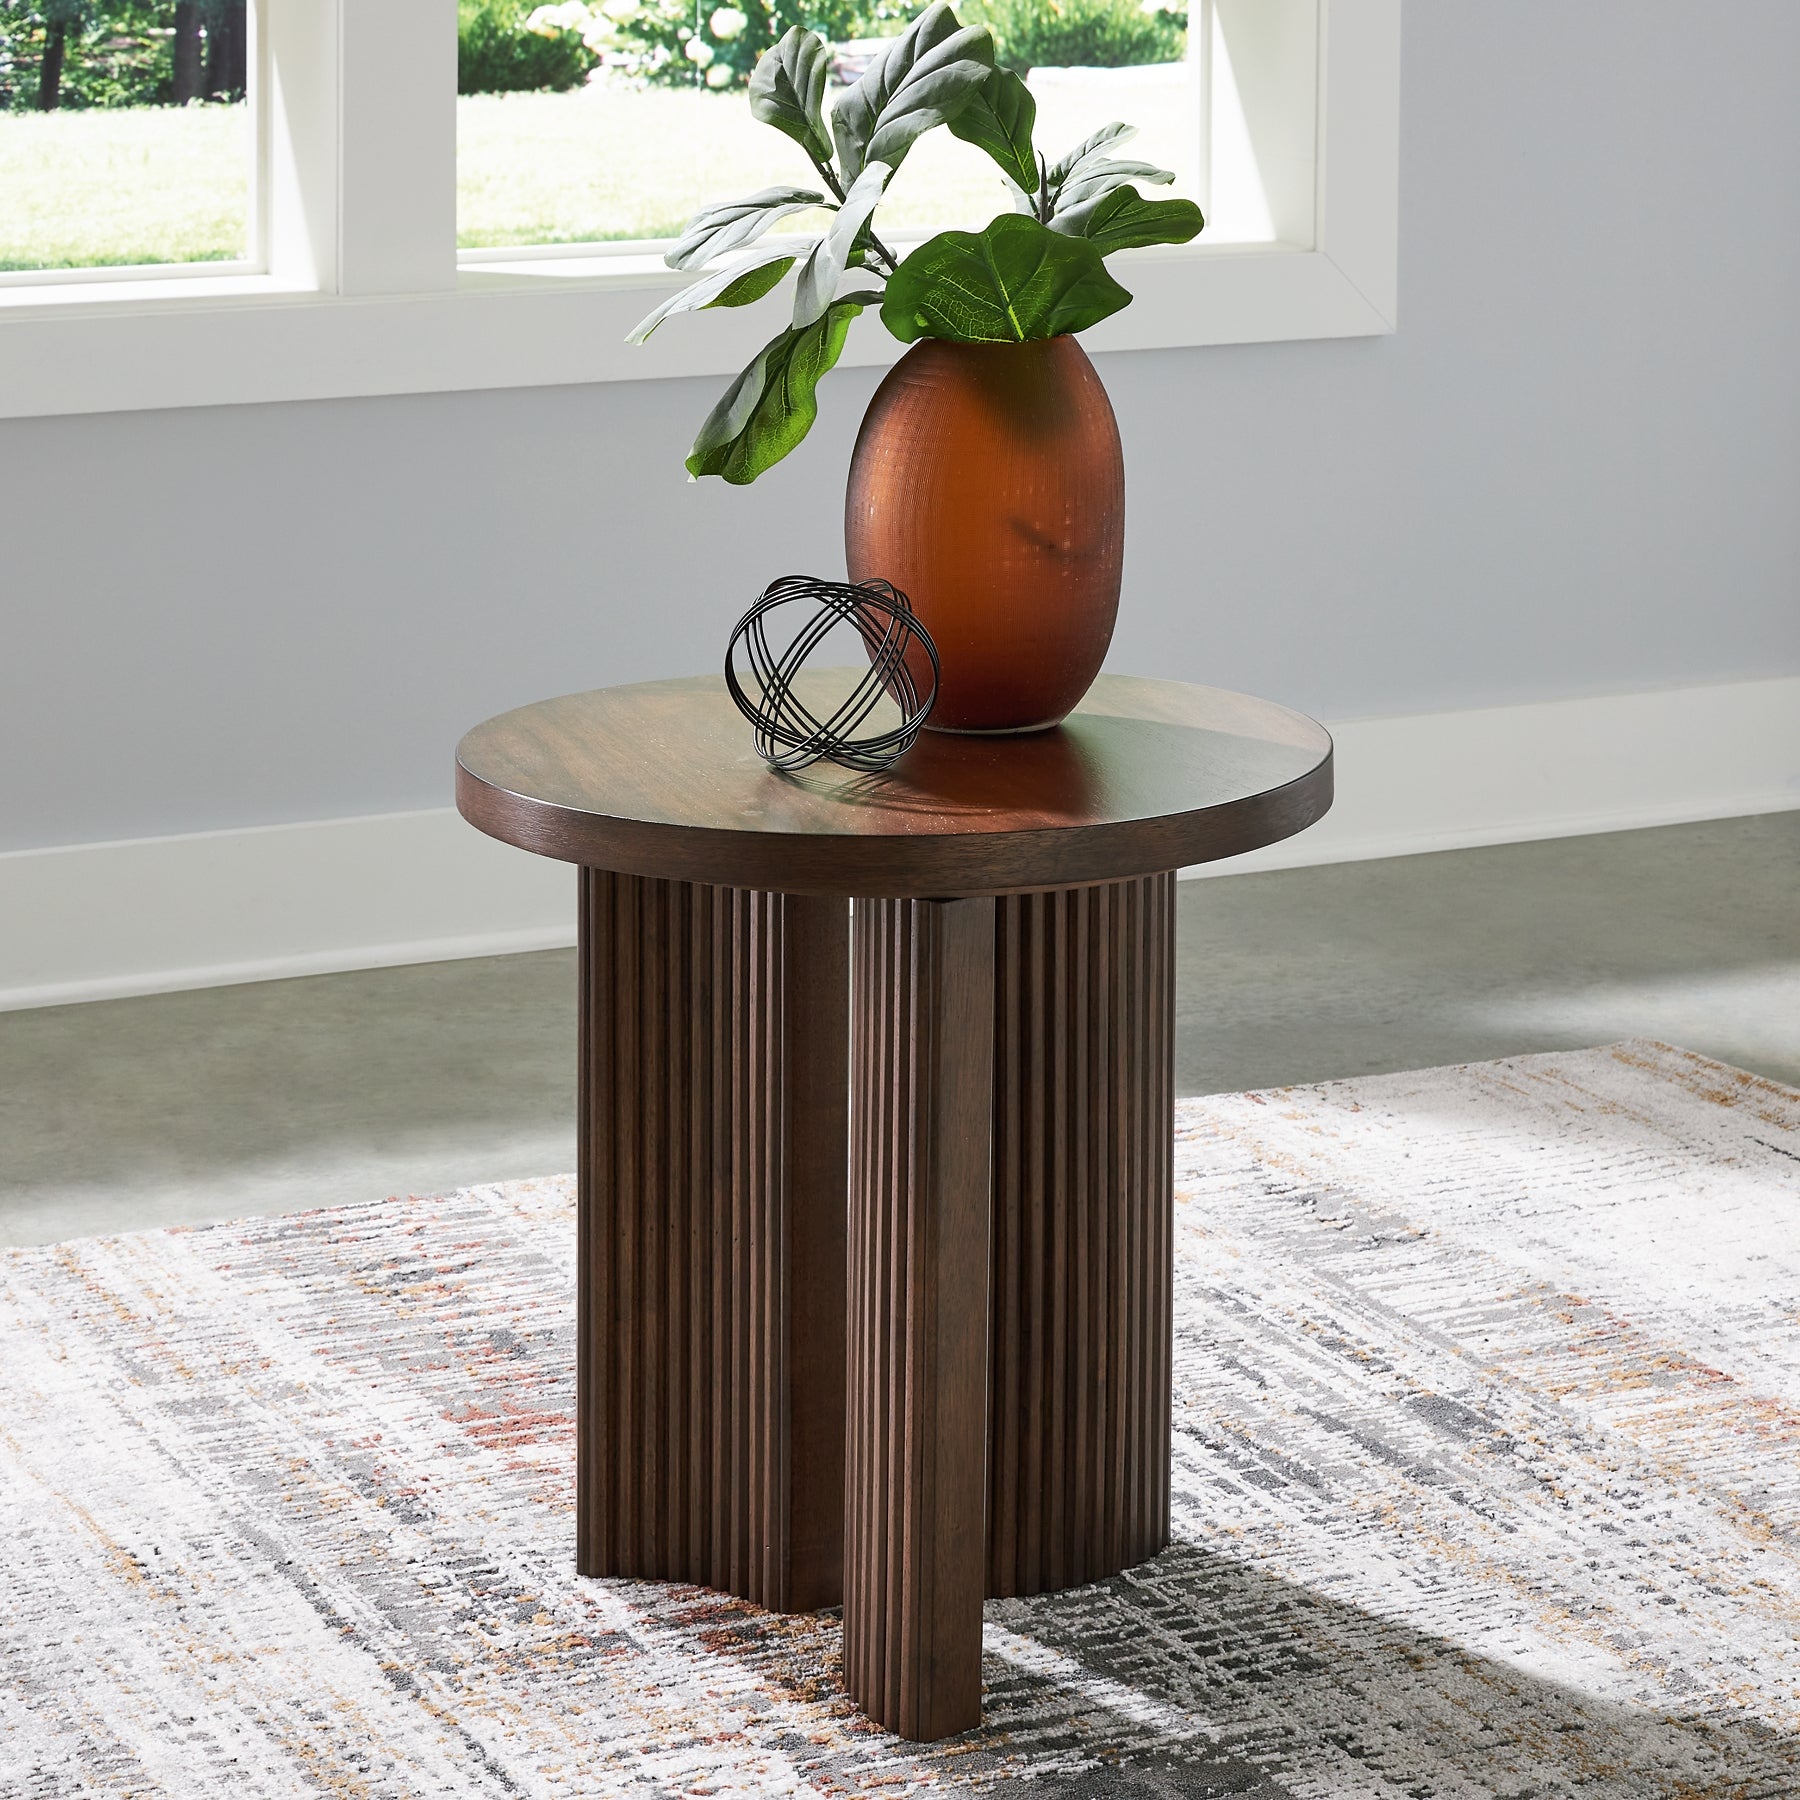 Korestone Coffee Table with 1 End Table Signature Design by Ashley®